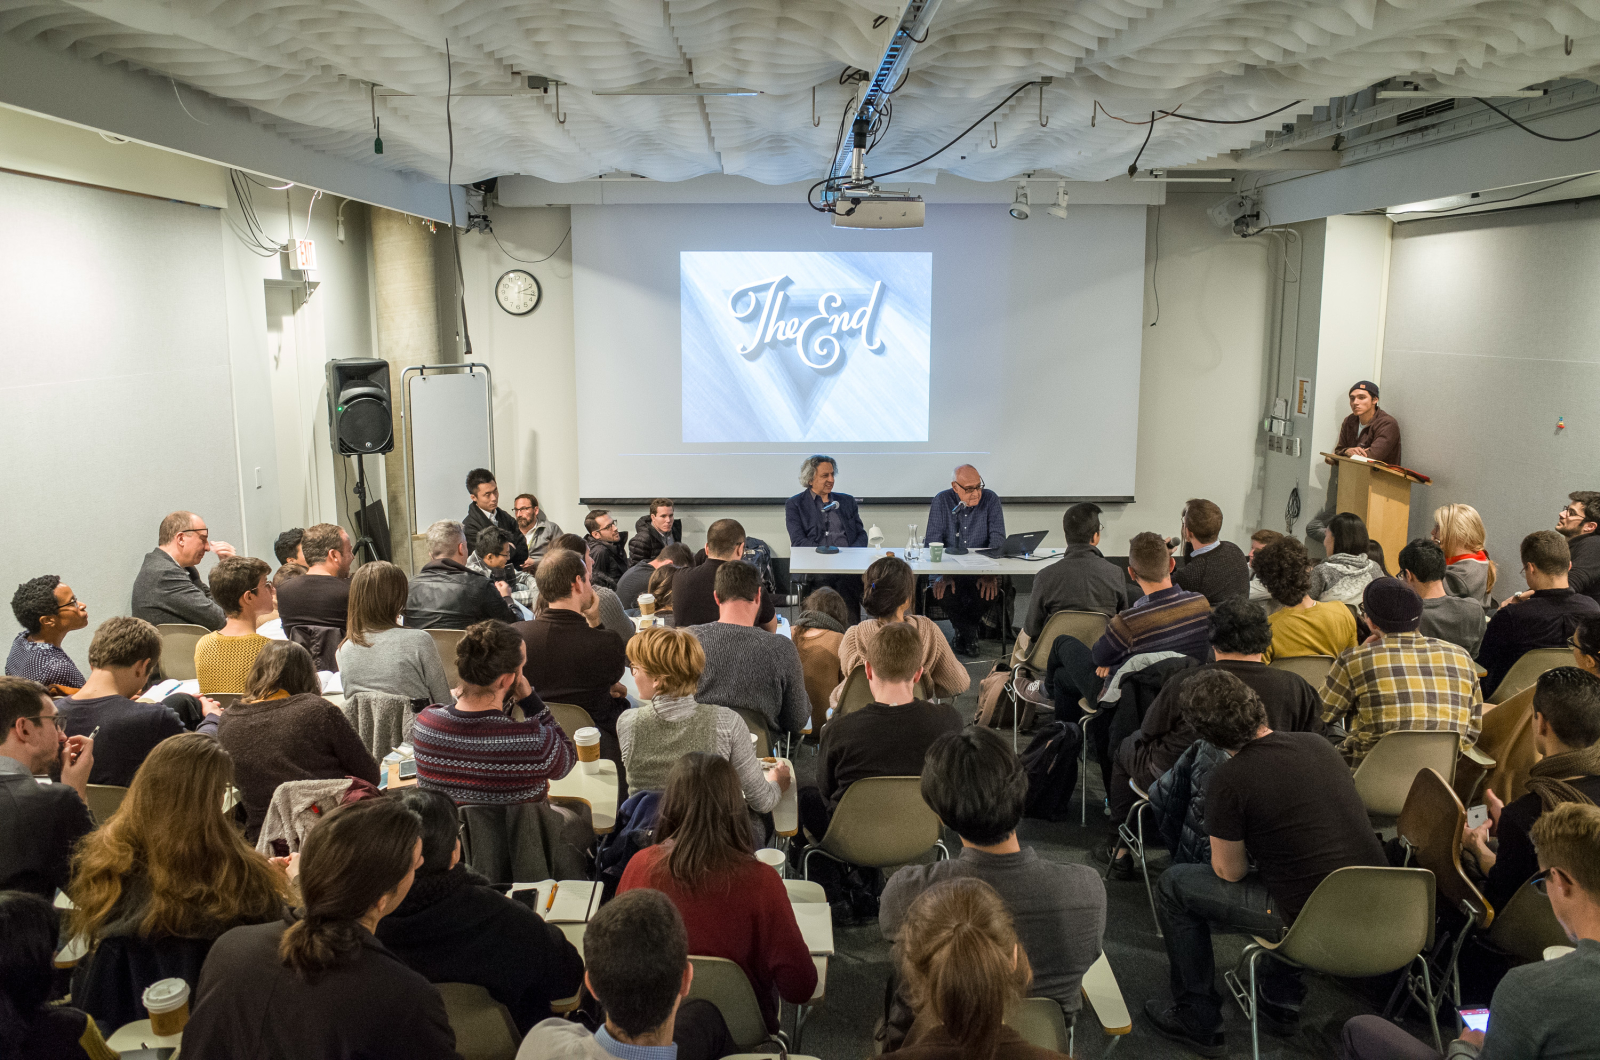 Image from GSD Talks: Elia Zenghelis, “The Image as Story Line and Emblem” event